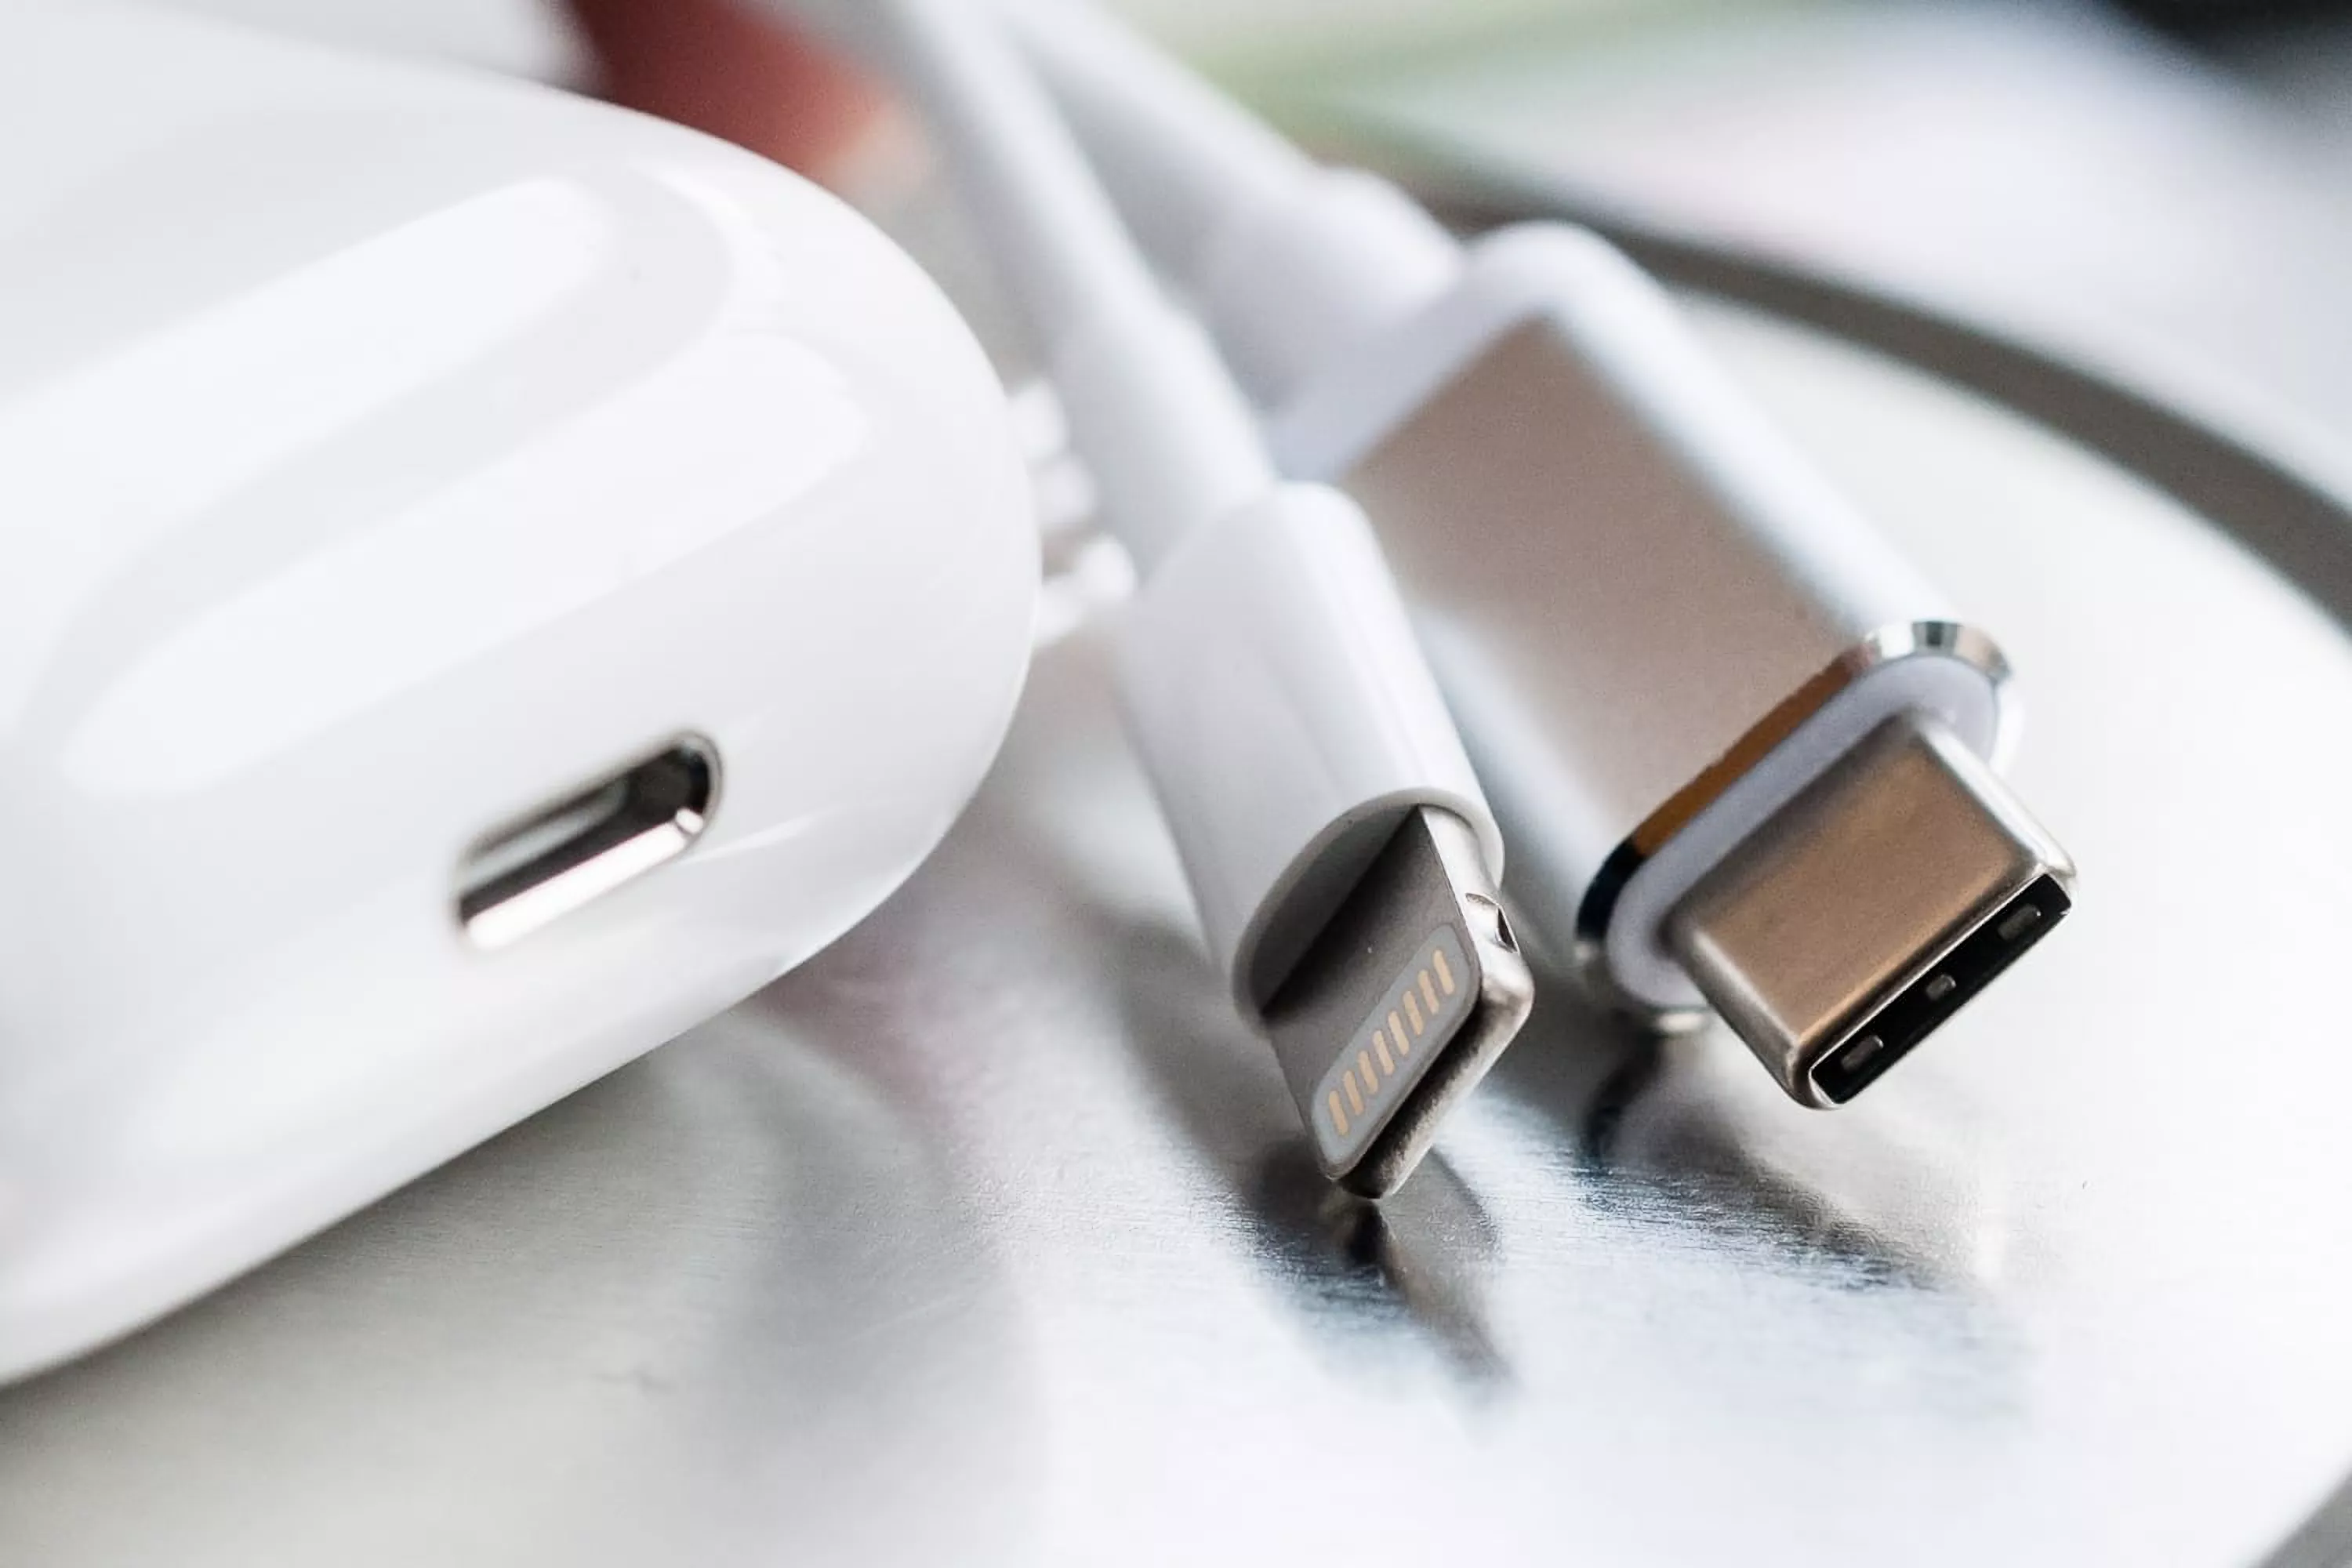 The European Commission wants to mandate USB Type-C on all new mobile devices